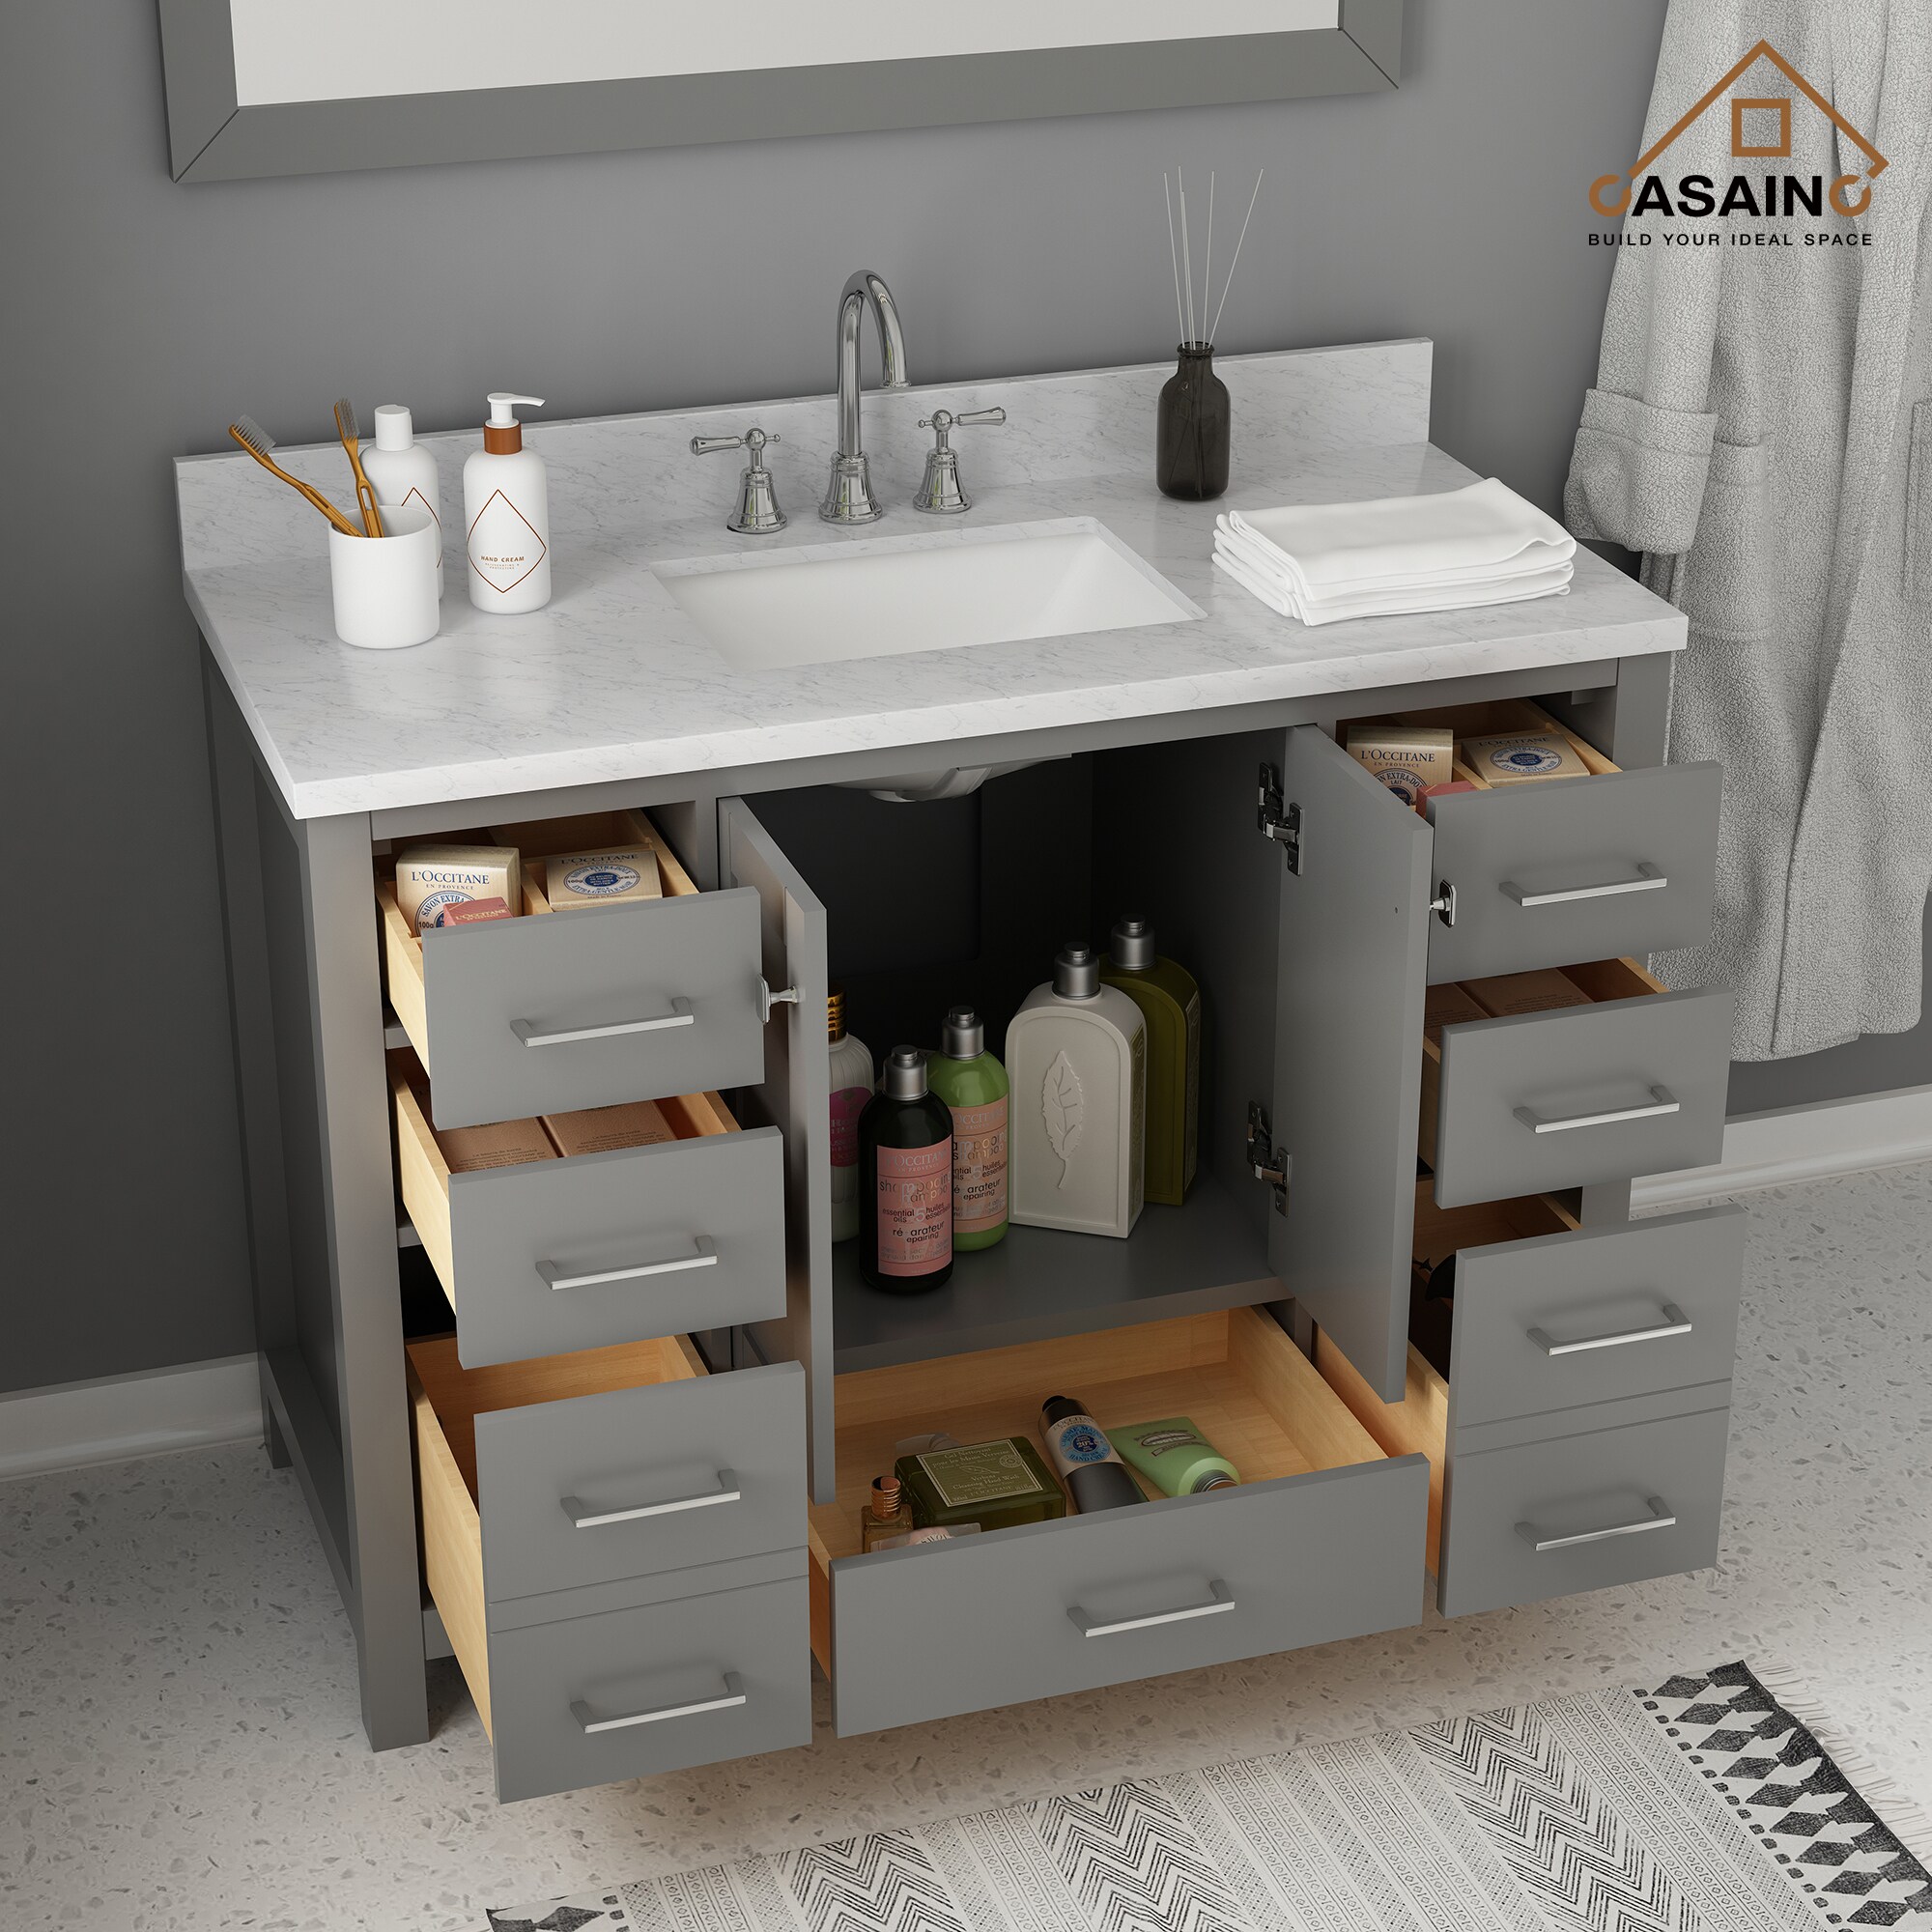 Casainc 48 In Gray Undermount Single Sink Bathroom Vanity With Off White With Speckles Marble 6736